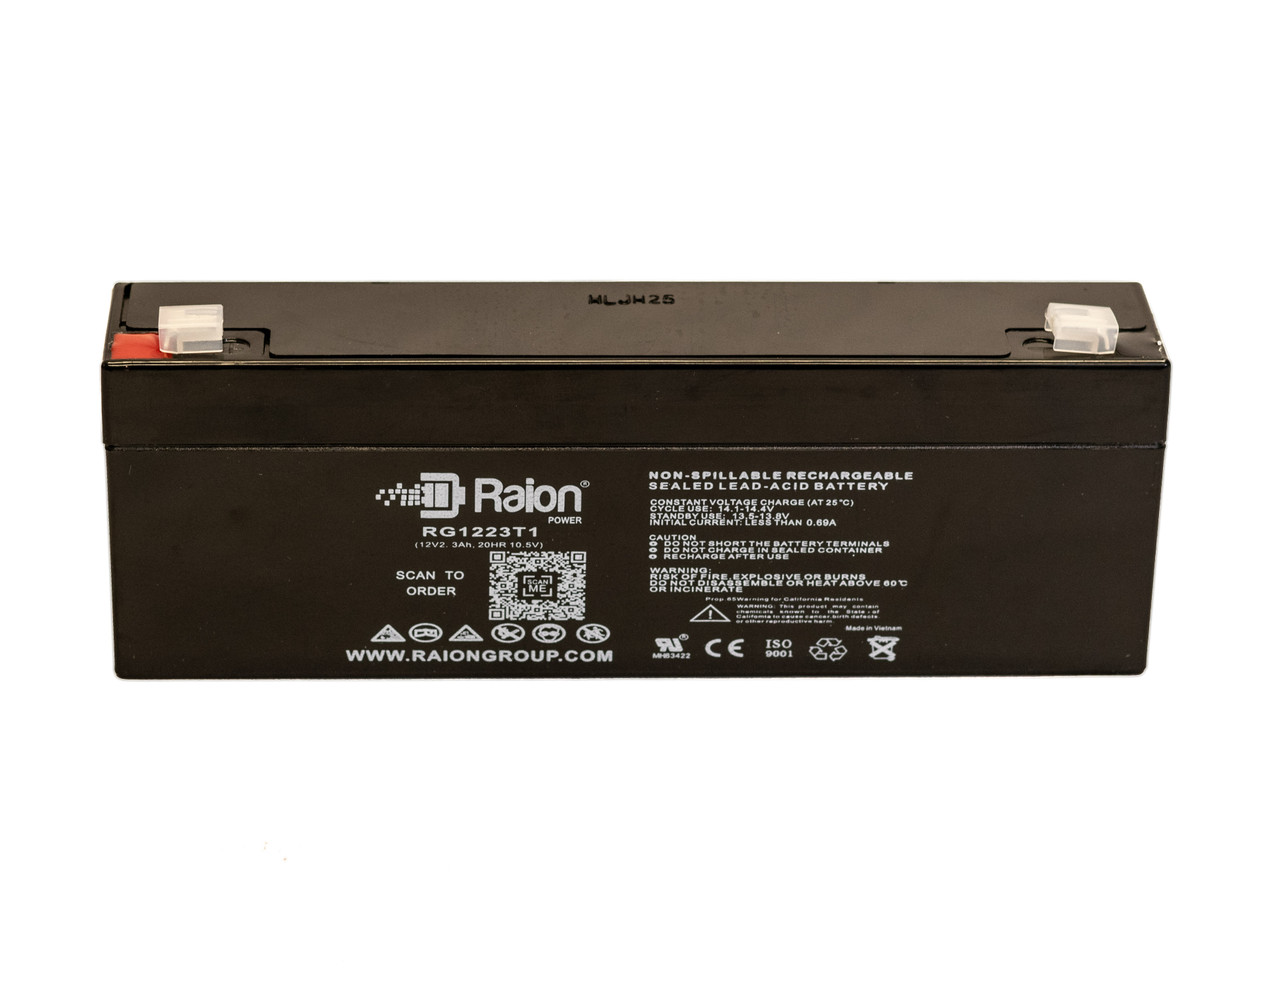 Raion Power 12V 2.3Ah SLA Battery With T1 Terminals For Criticare Systems 507ER VSM